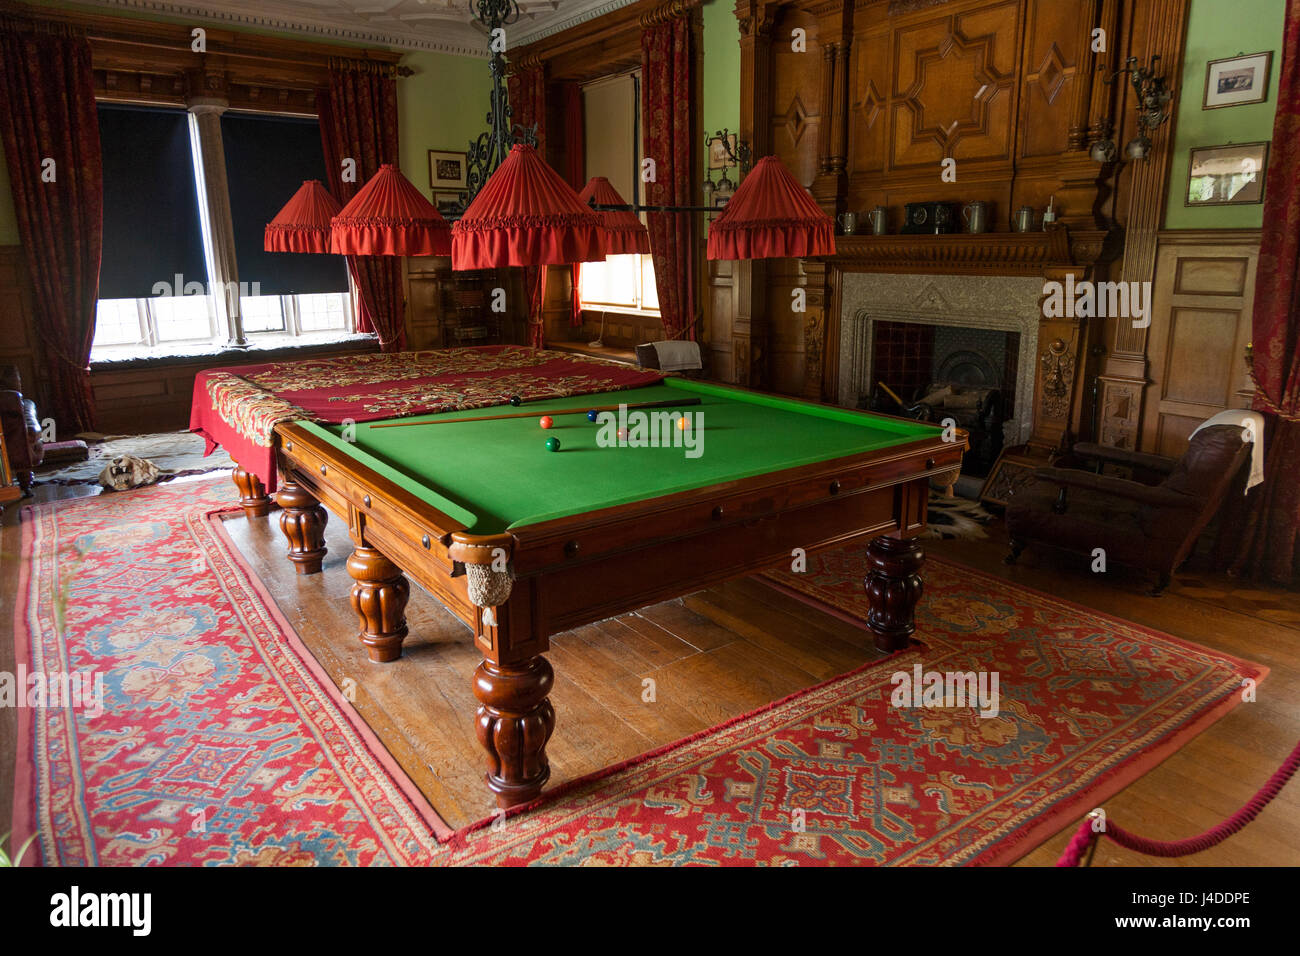 Billiards room and table / Games room at Lanhydrock, Bodmin, Cornwall. (70) Stock Photo